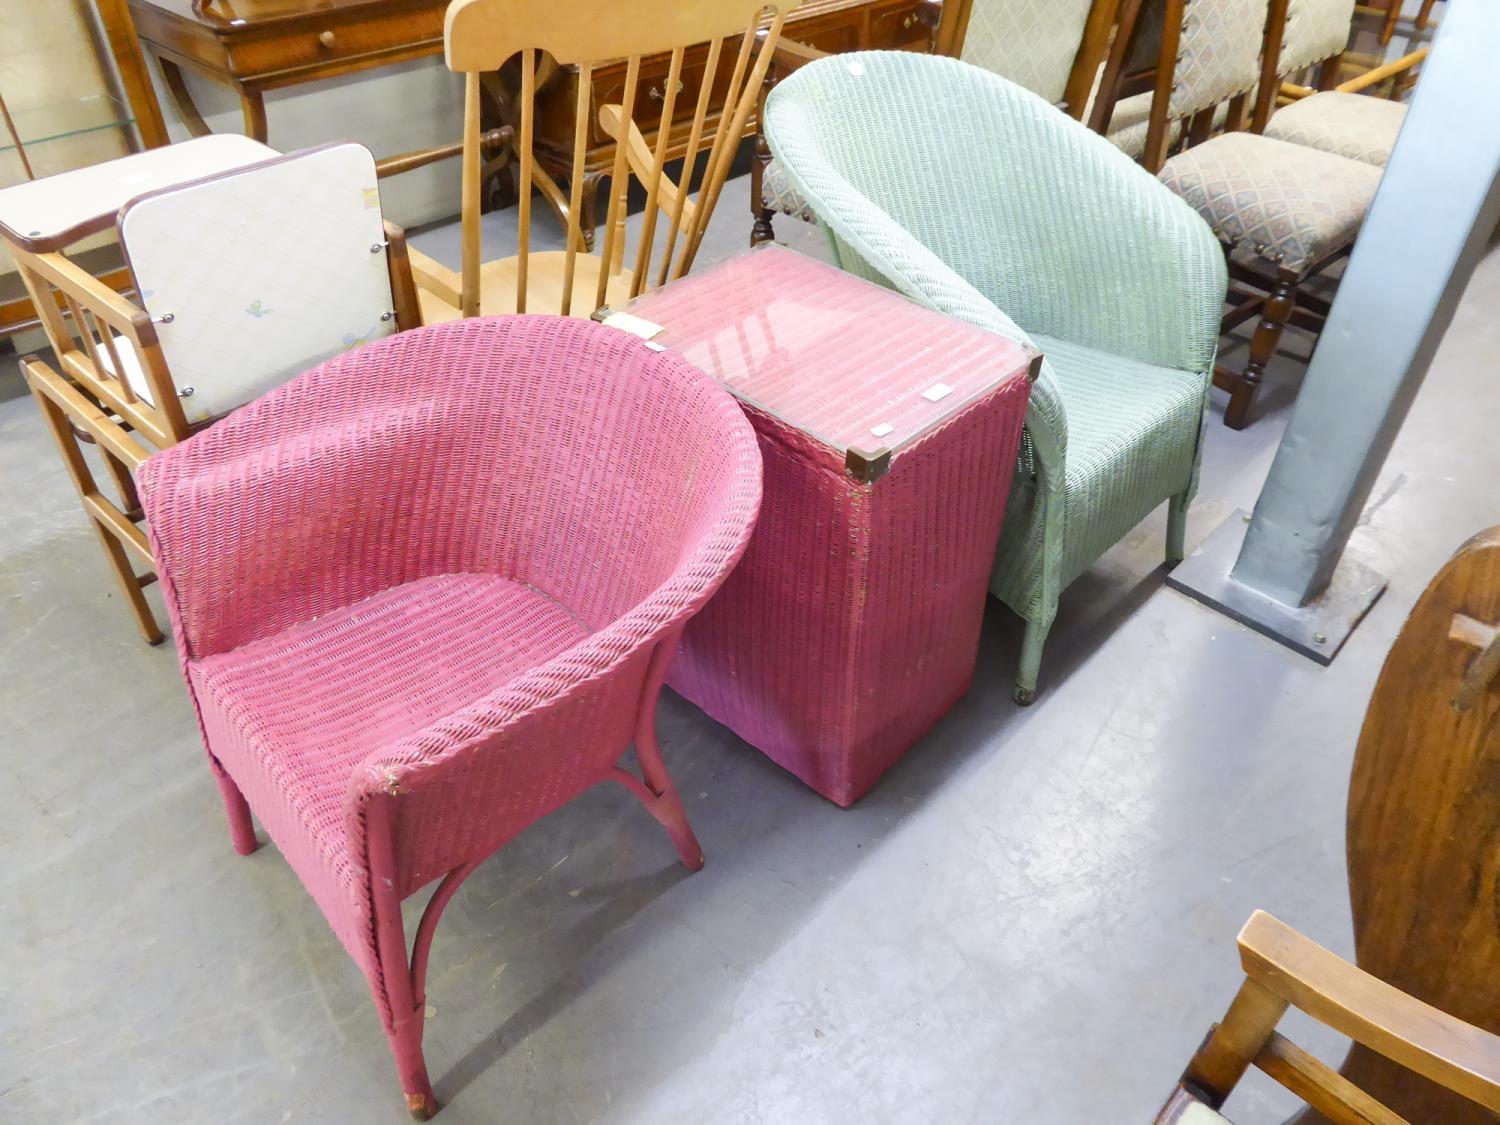 TWO LLOYD LOOM BEDROOM CHAIRS AND A LLOYD LOOM RECEIVER WITH GLASS TOP (3)